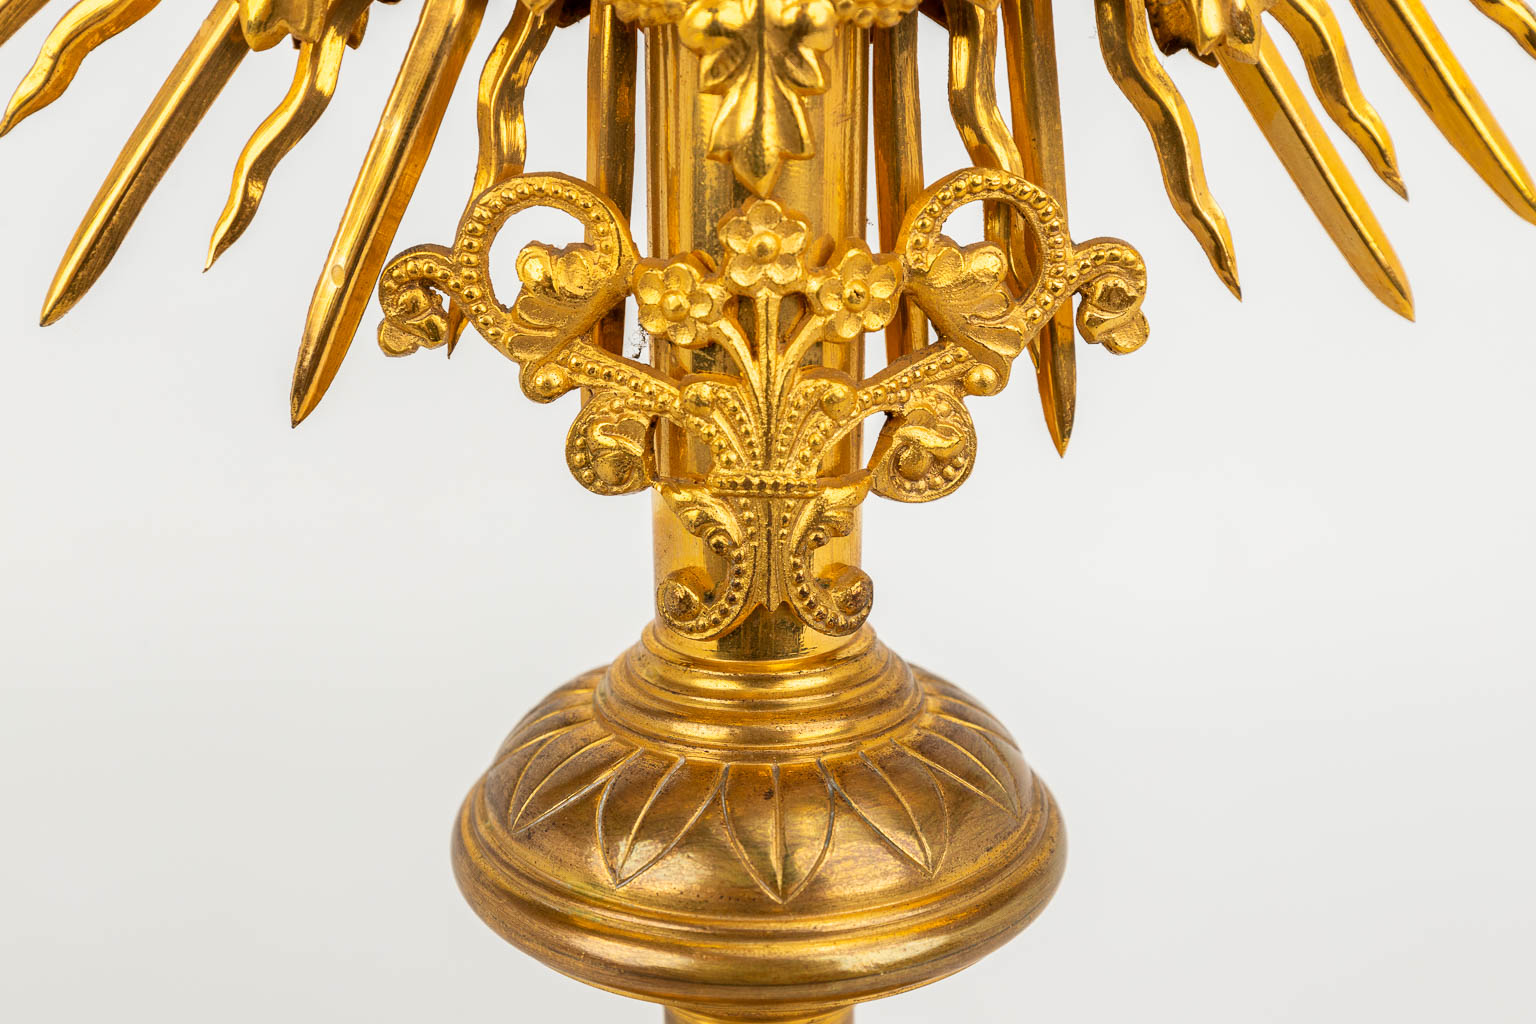 A traditional solar monstrance made of brass with cut glass decoration. (H:46cm)